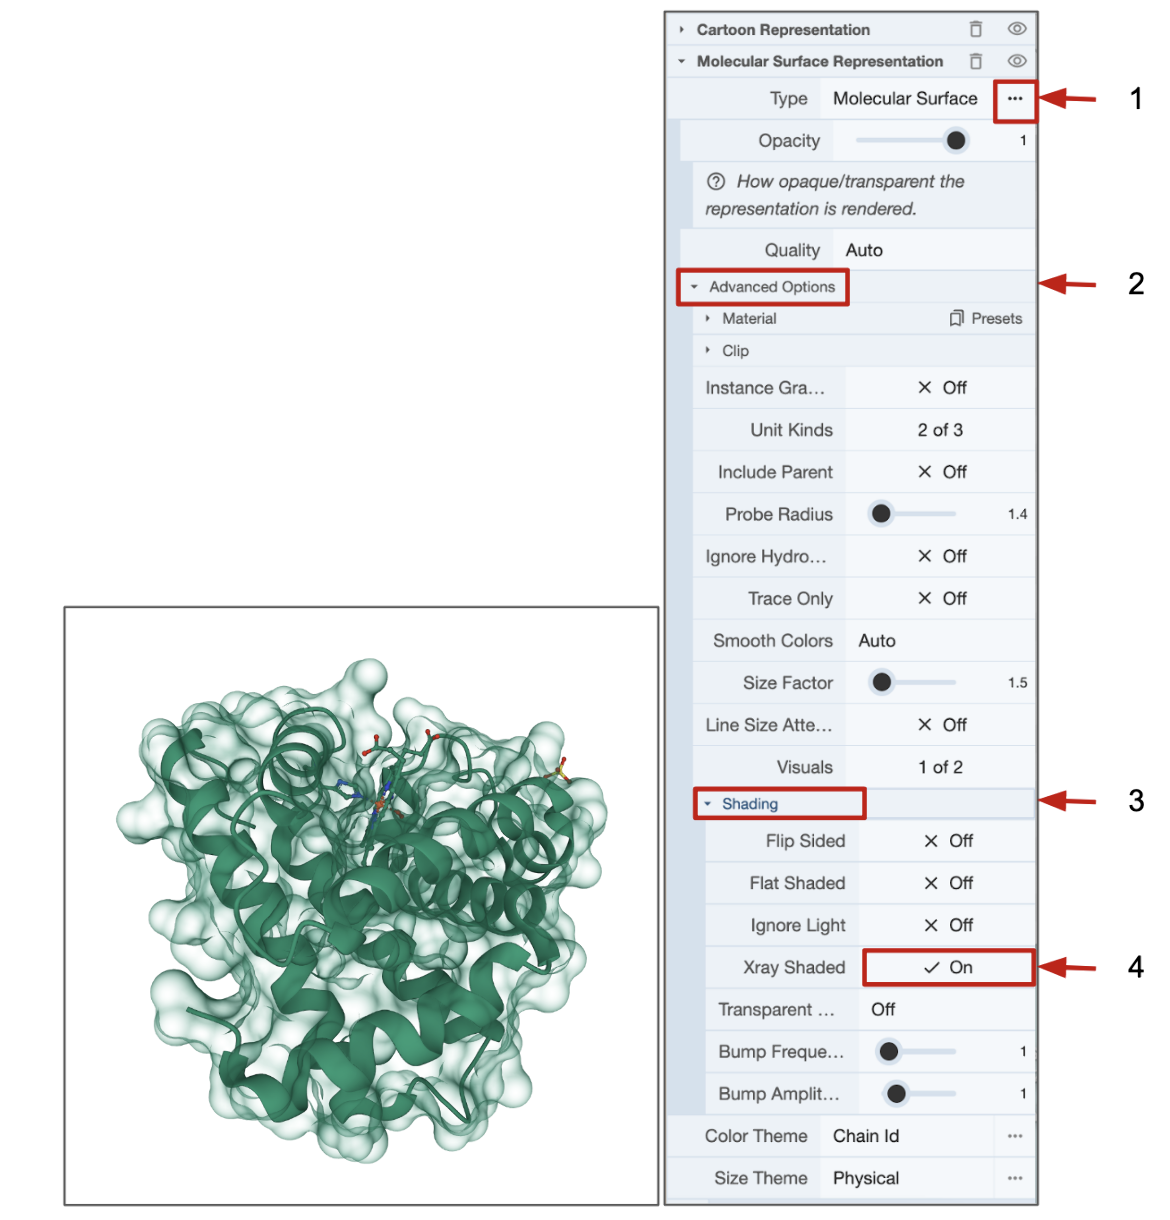 Figure 6: Steps to display a transparent molecular surface - 1. expand the molecular surface options; 2. open the Advanced Options menu; 3. expand the shading options; 4. turn on the X-ray Shaded option. The above steps were applied to the structure of myoglobin (PDB entry 1mbo) and the resulting view is shown on the left of the figure. 